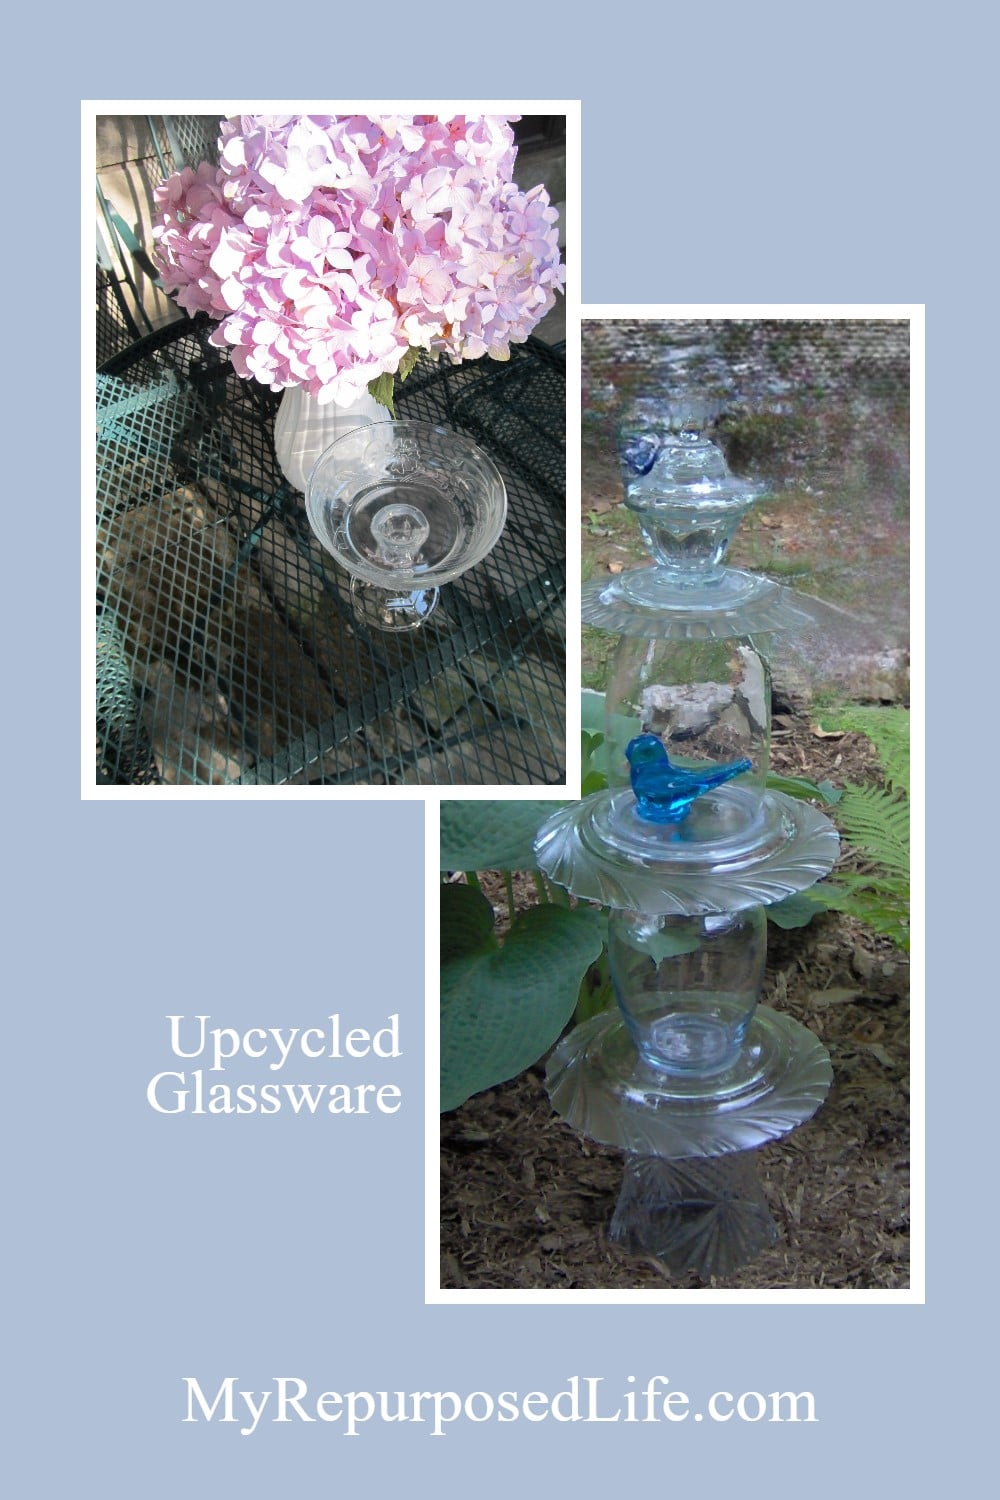 Collecting glassware can be addictive! But, it's a lot of fun and can be very rewarding when you have a lot of unique pieces to choose from when you make your repurposed glass totems. It really is a great way to upcycle all those glass vases you may already have on hand. #MyRepurposedLife #repurposed #glassware #garden #totem #upcycled via @repurposedlife